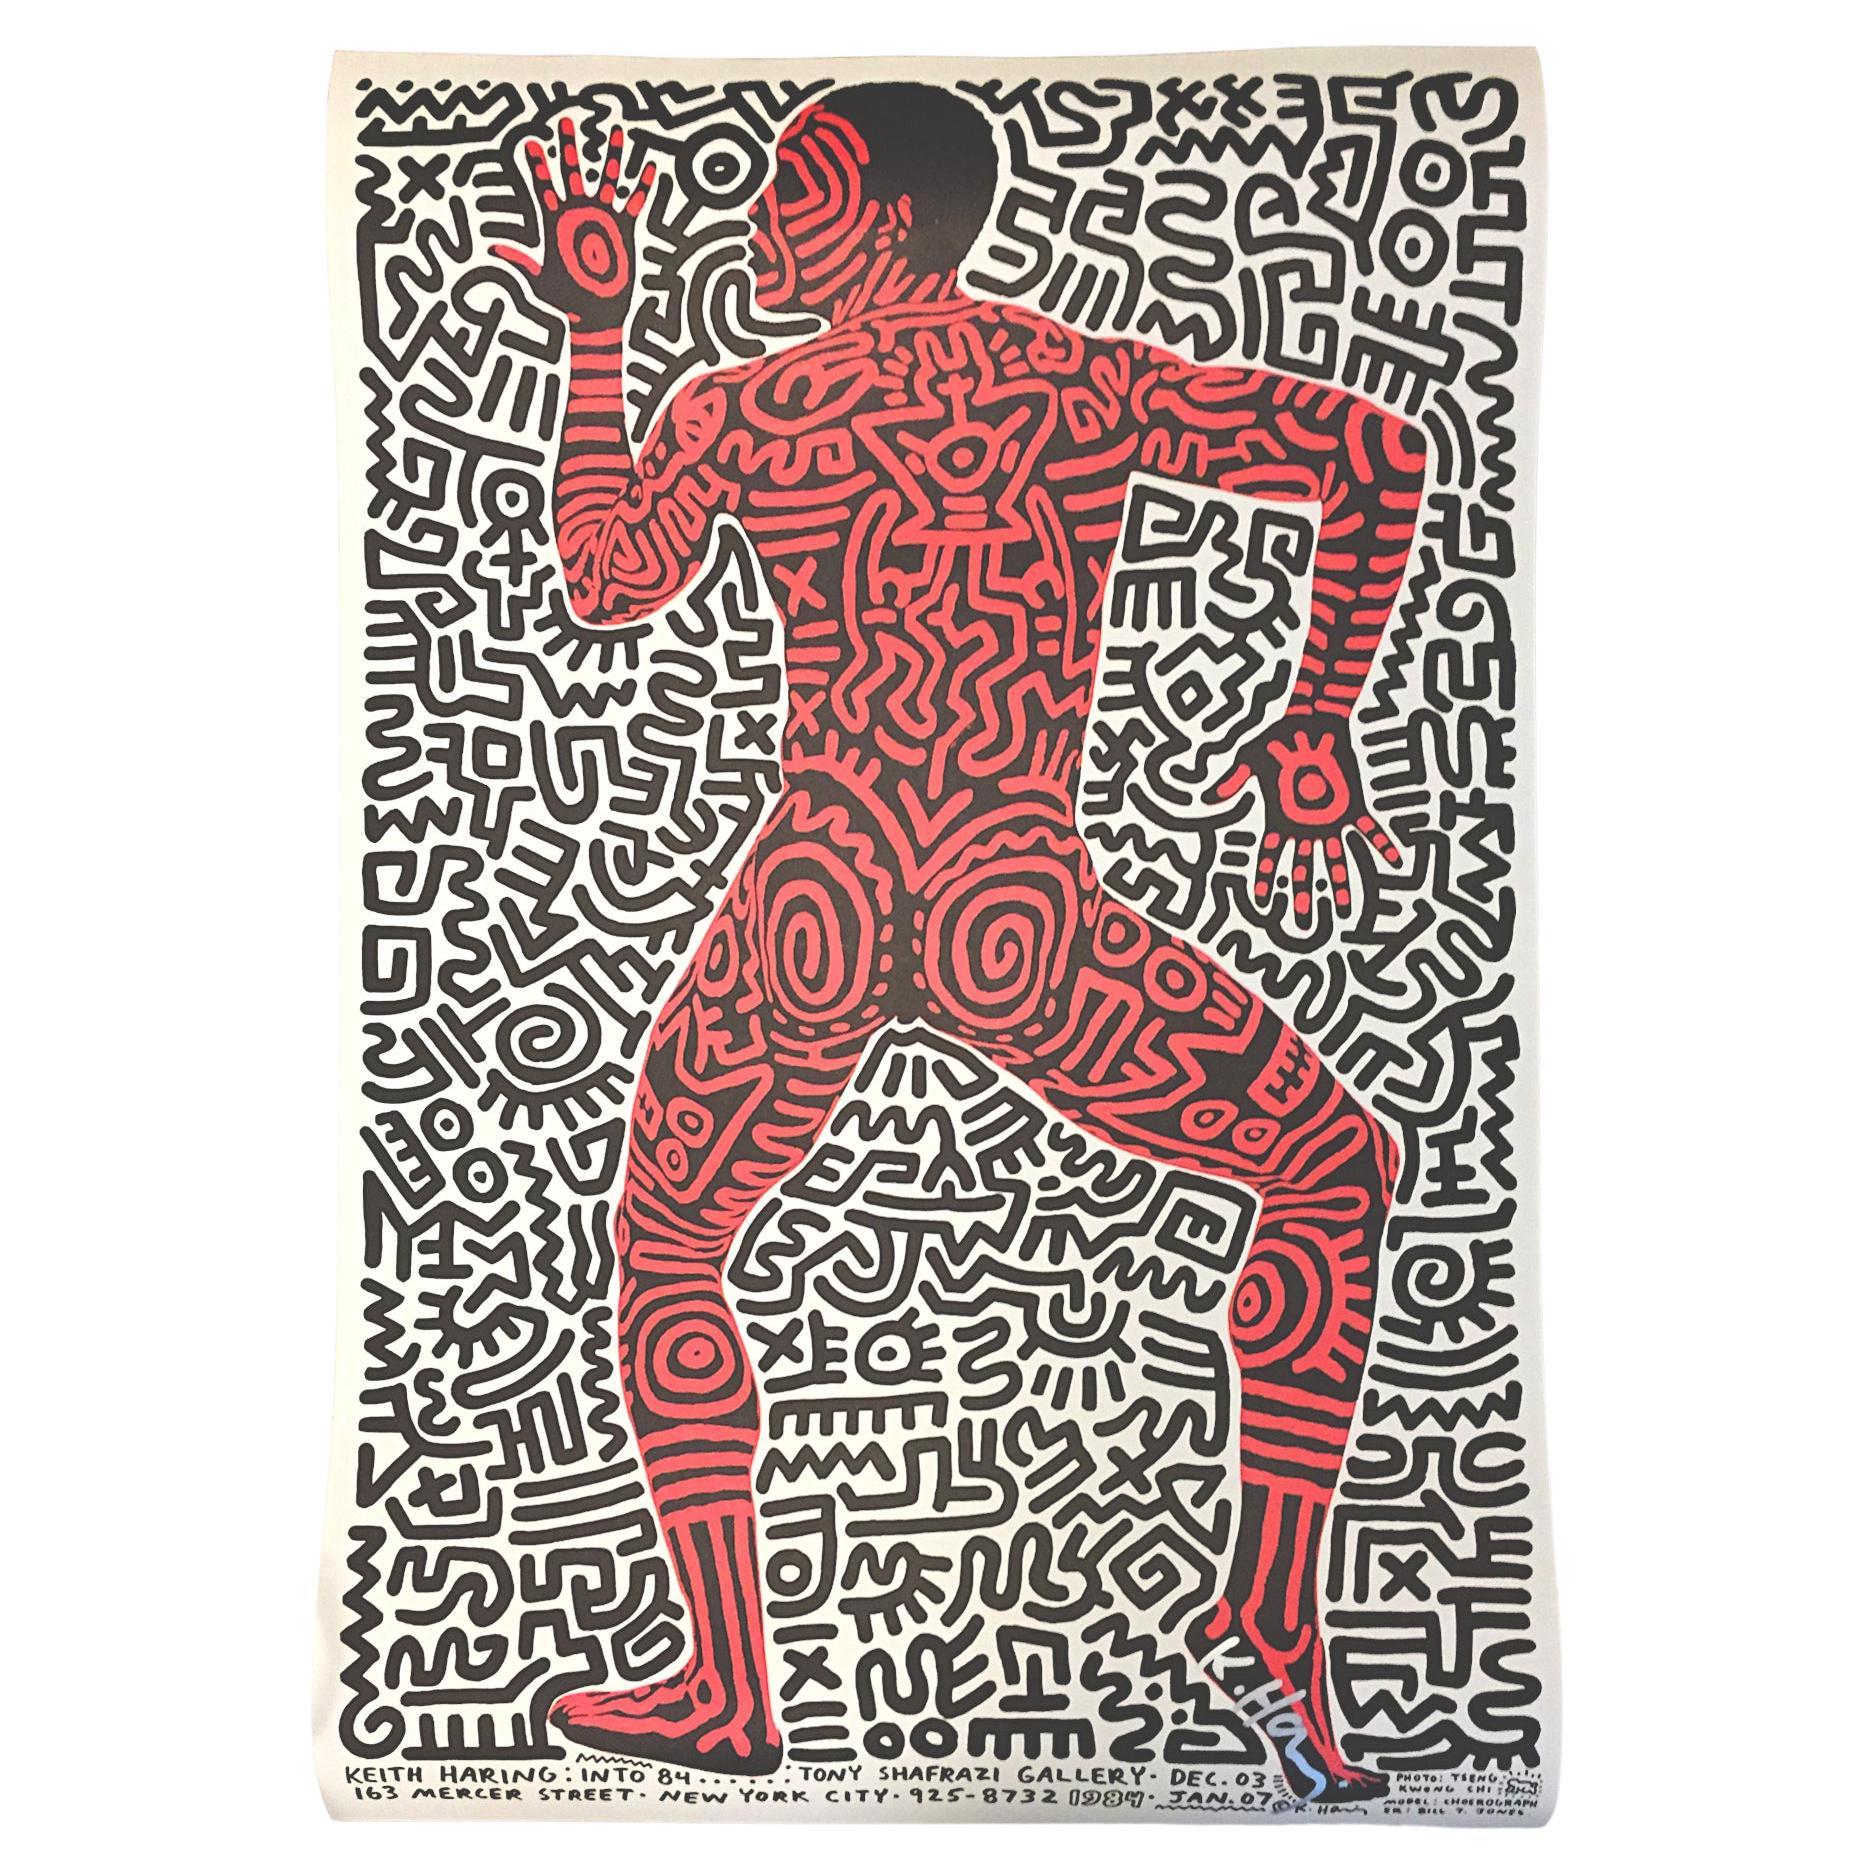 Keith Haring Signed Original 1983 Exhibition Poster